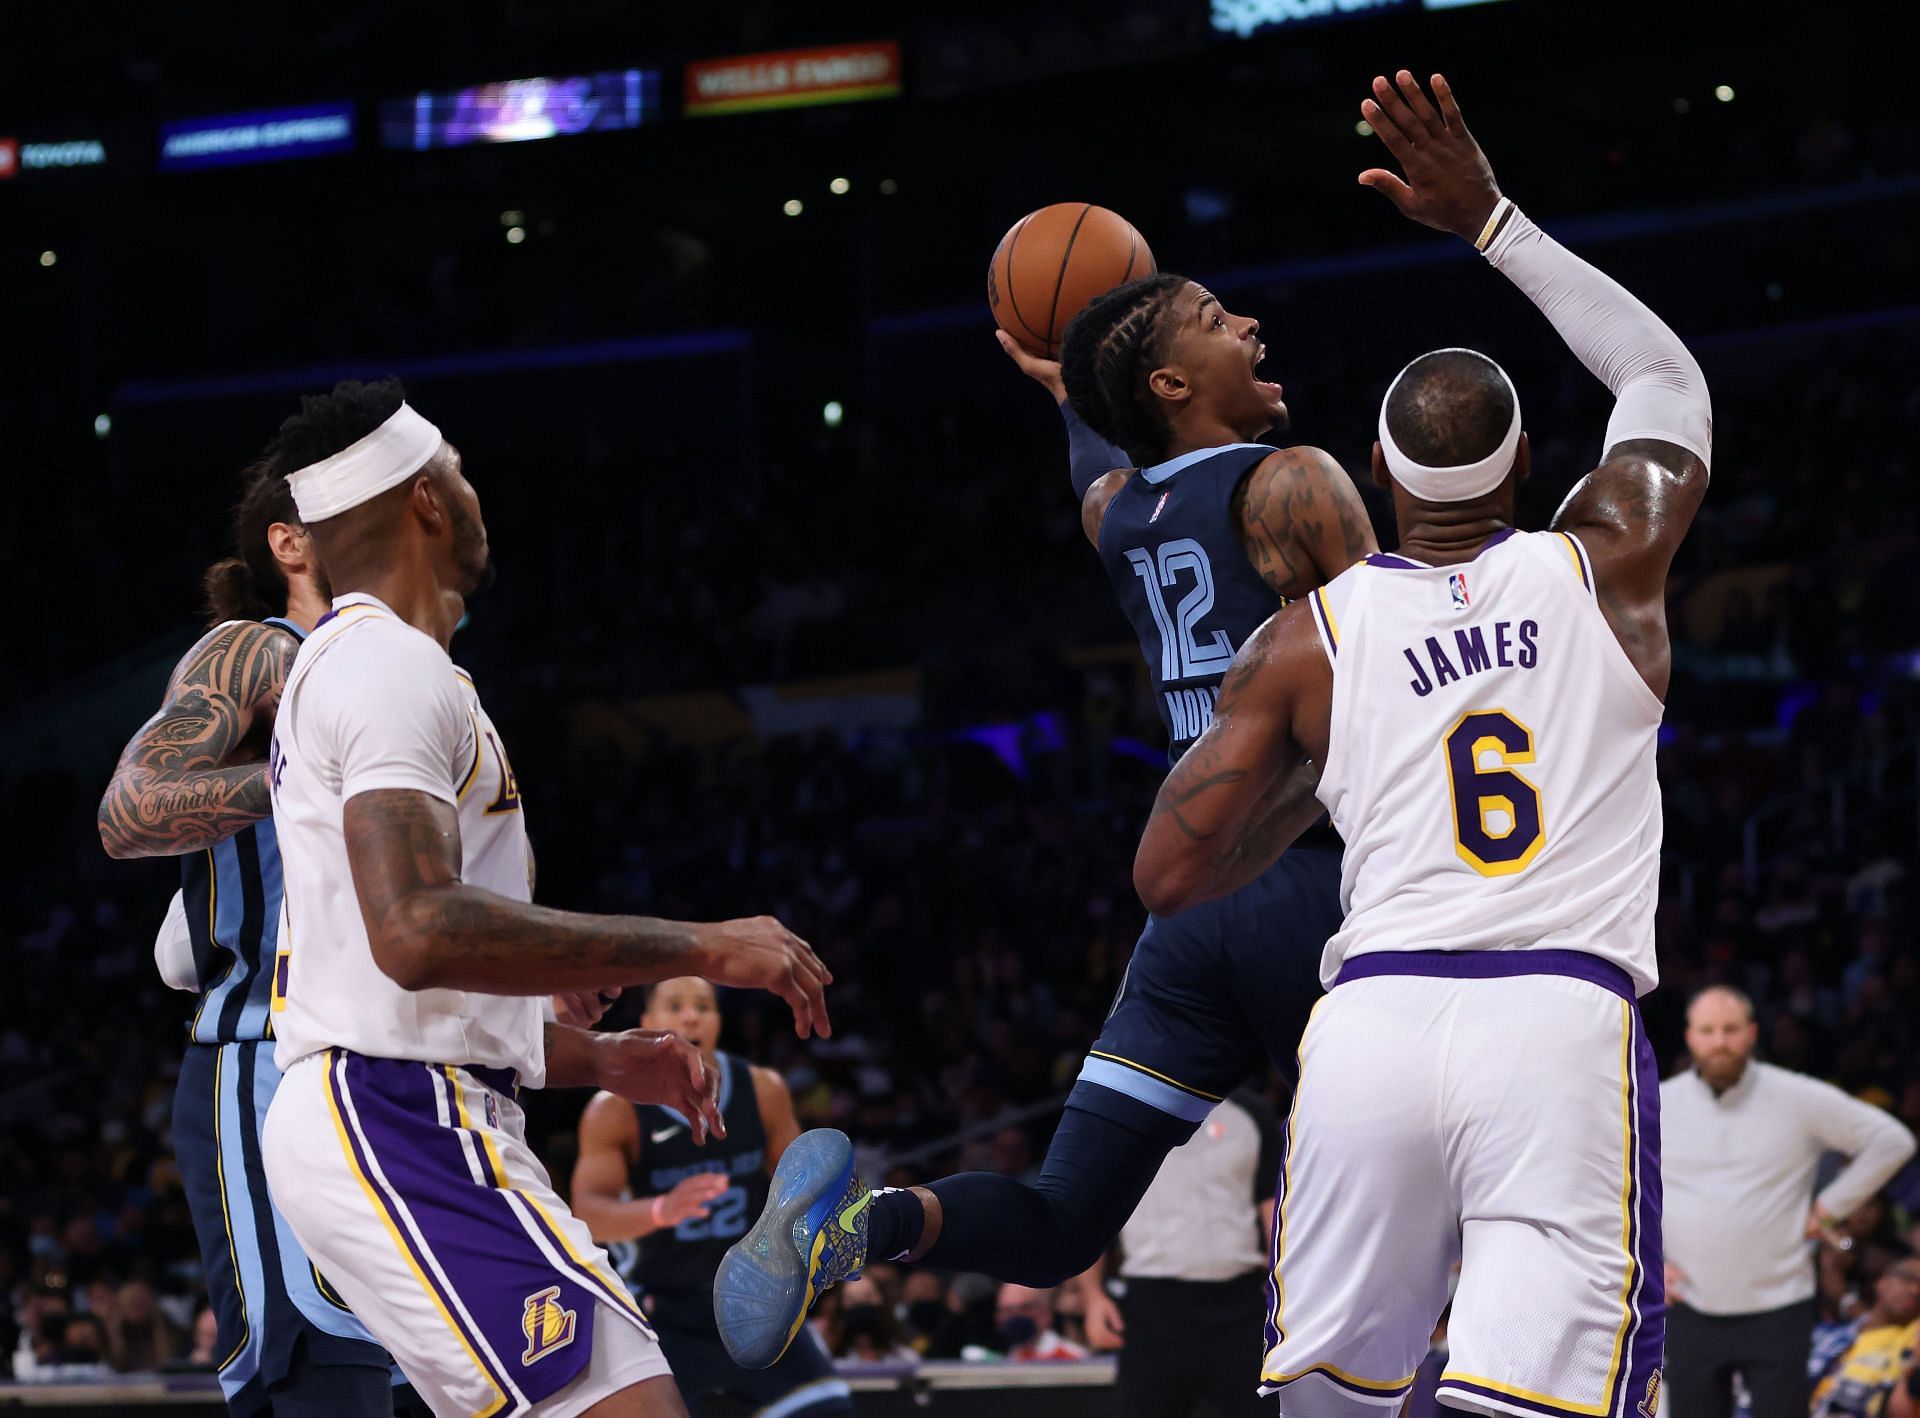 Desmond Bane told Shannon Sharpe, 'You know this game over' before he got  ball stolen in Lakers-Grizzlies game - Lakers Daily